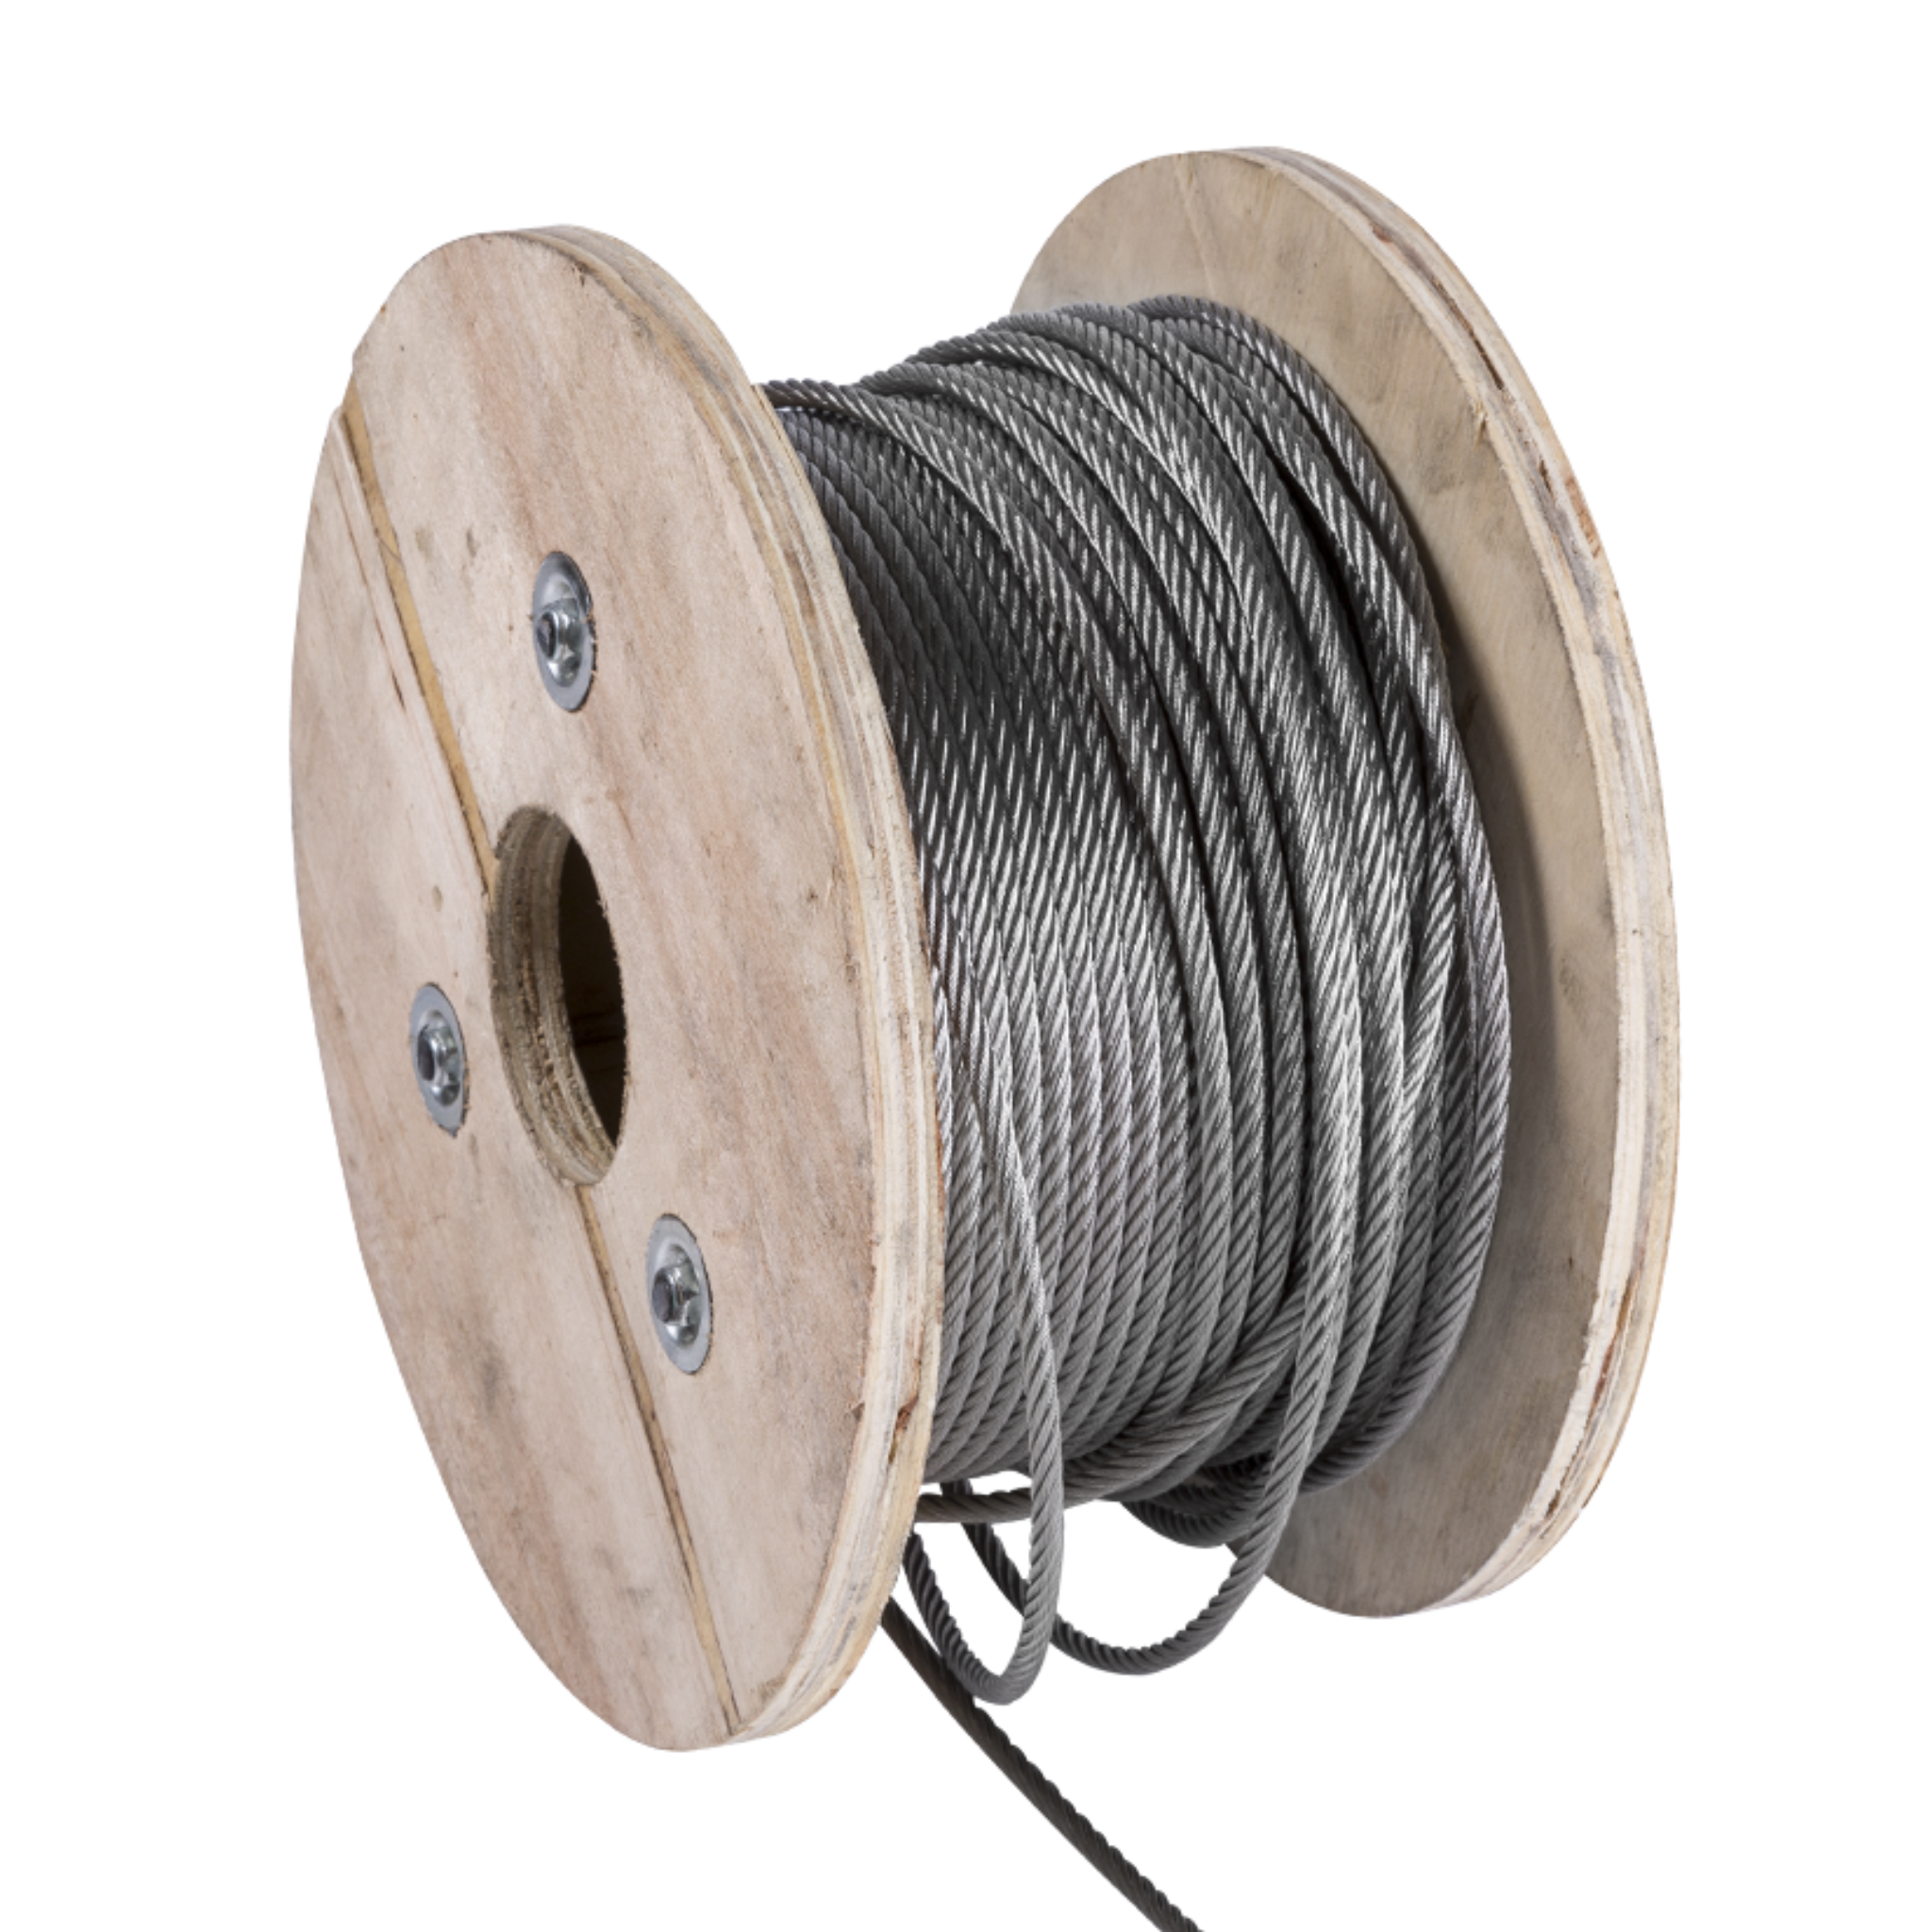 Stainless steel rope - StroFIX